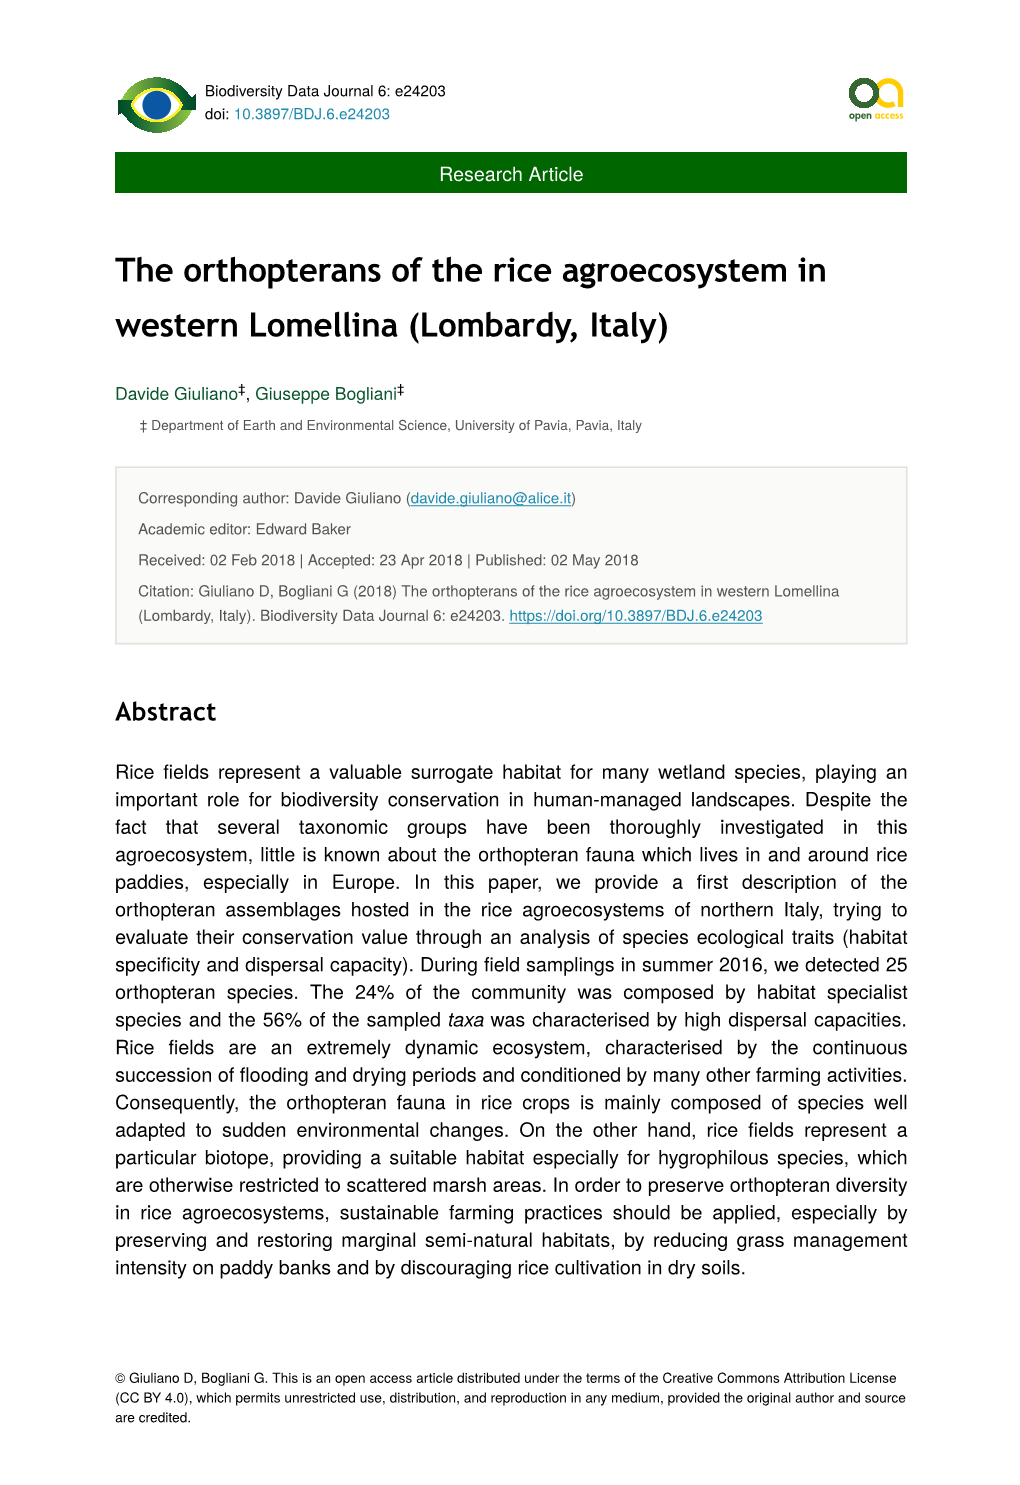 The Orthopterans of the Rice Agroecosystem in Western Lomellina (Lombardy, Italy)